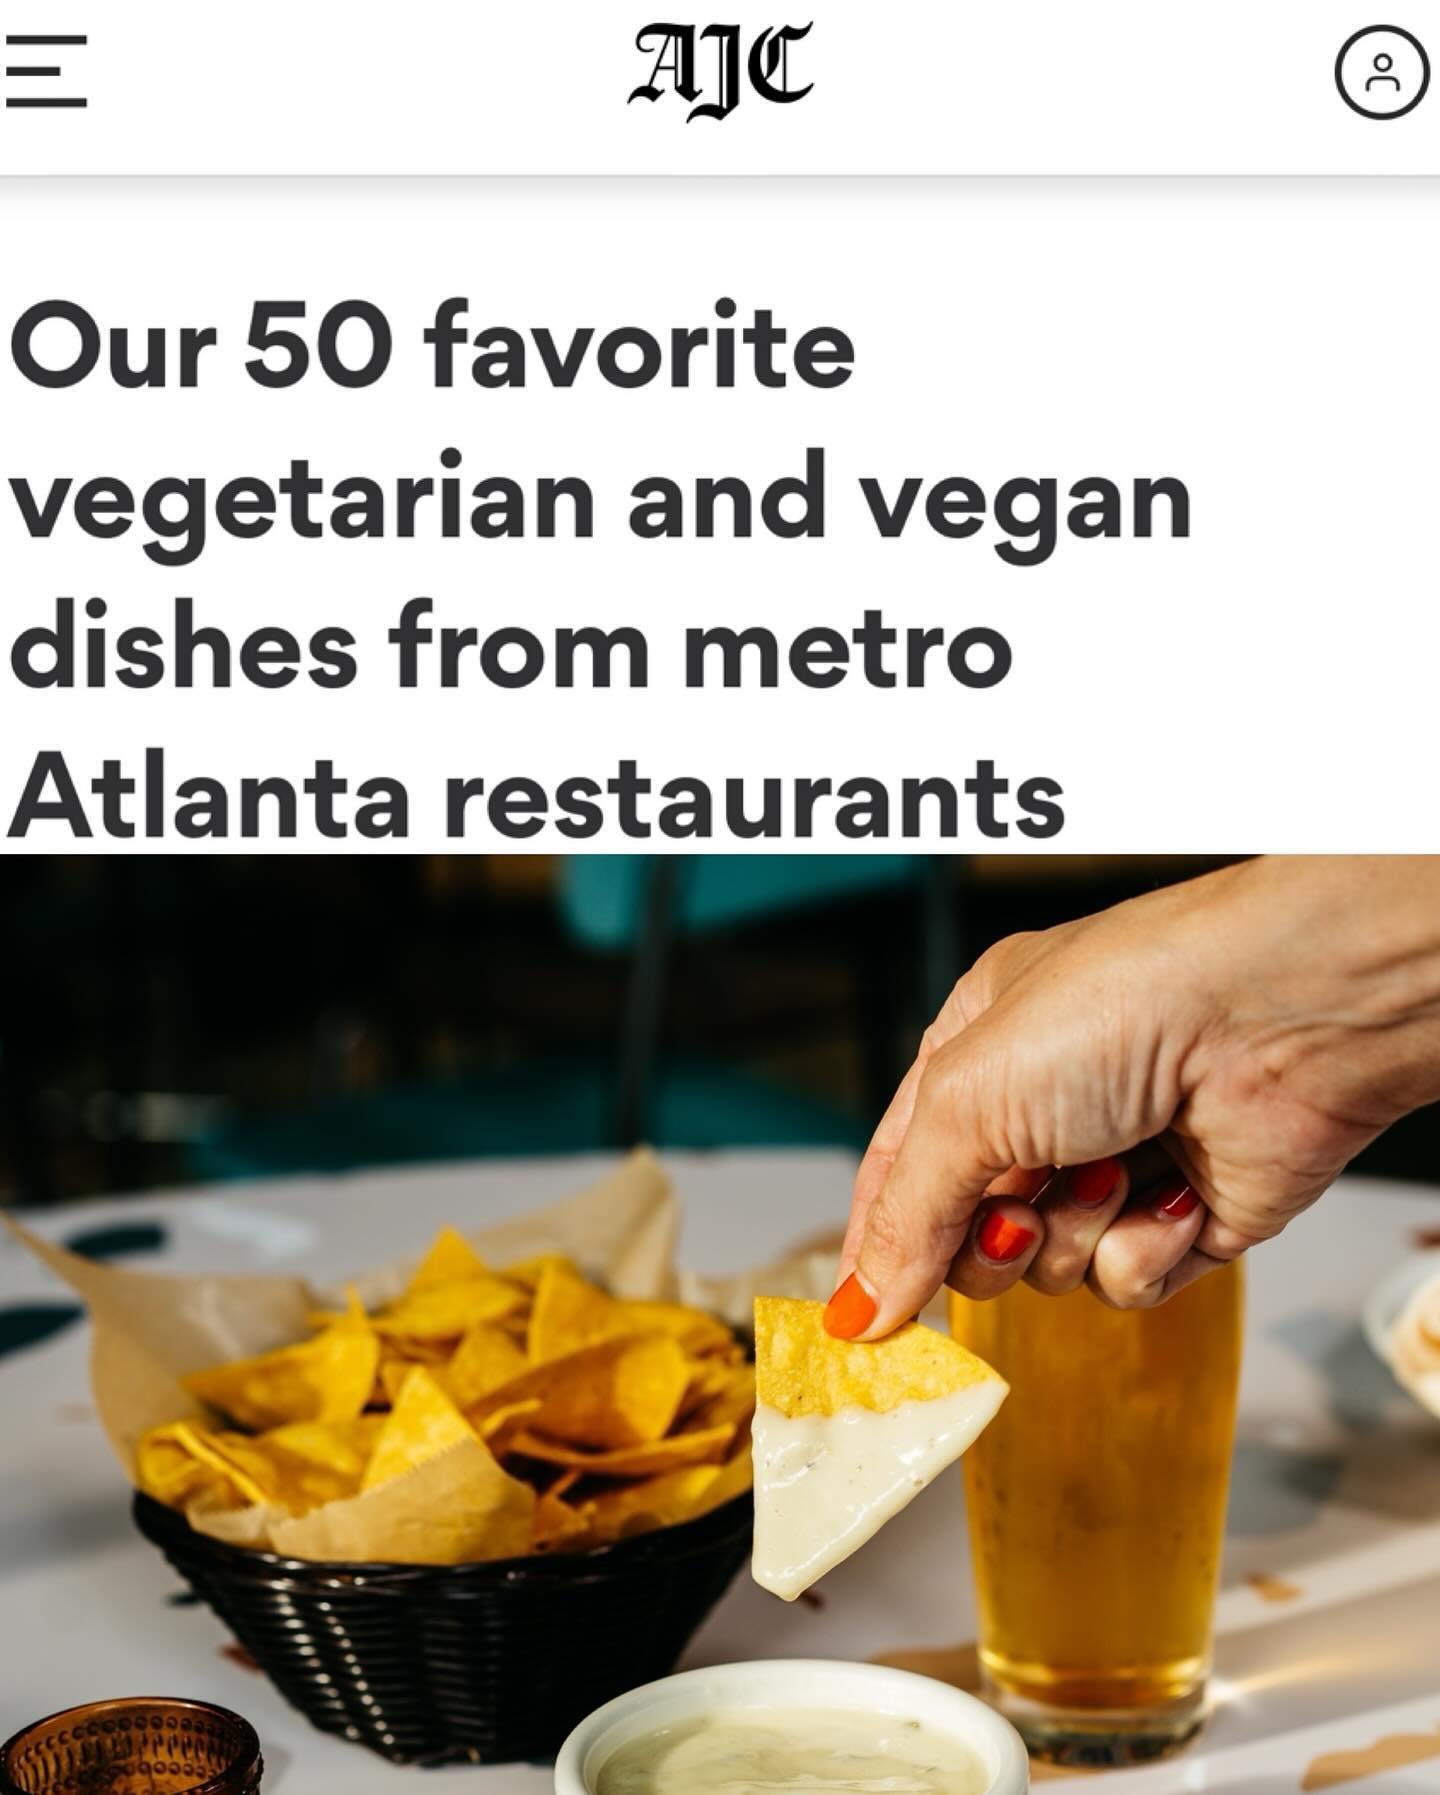 Thank you @ajcdining for giving our queso a spot on your 50 favorite vegan dishes!
⁠
Come by tonight for Noche de Nacho, pair it with a cold beer, and see what all the fuss is about. Nacho, beer, and margarita specials every Thursday 5-10pm 🍻
&zwnj;